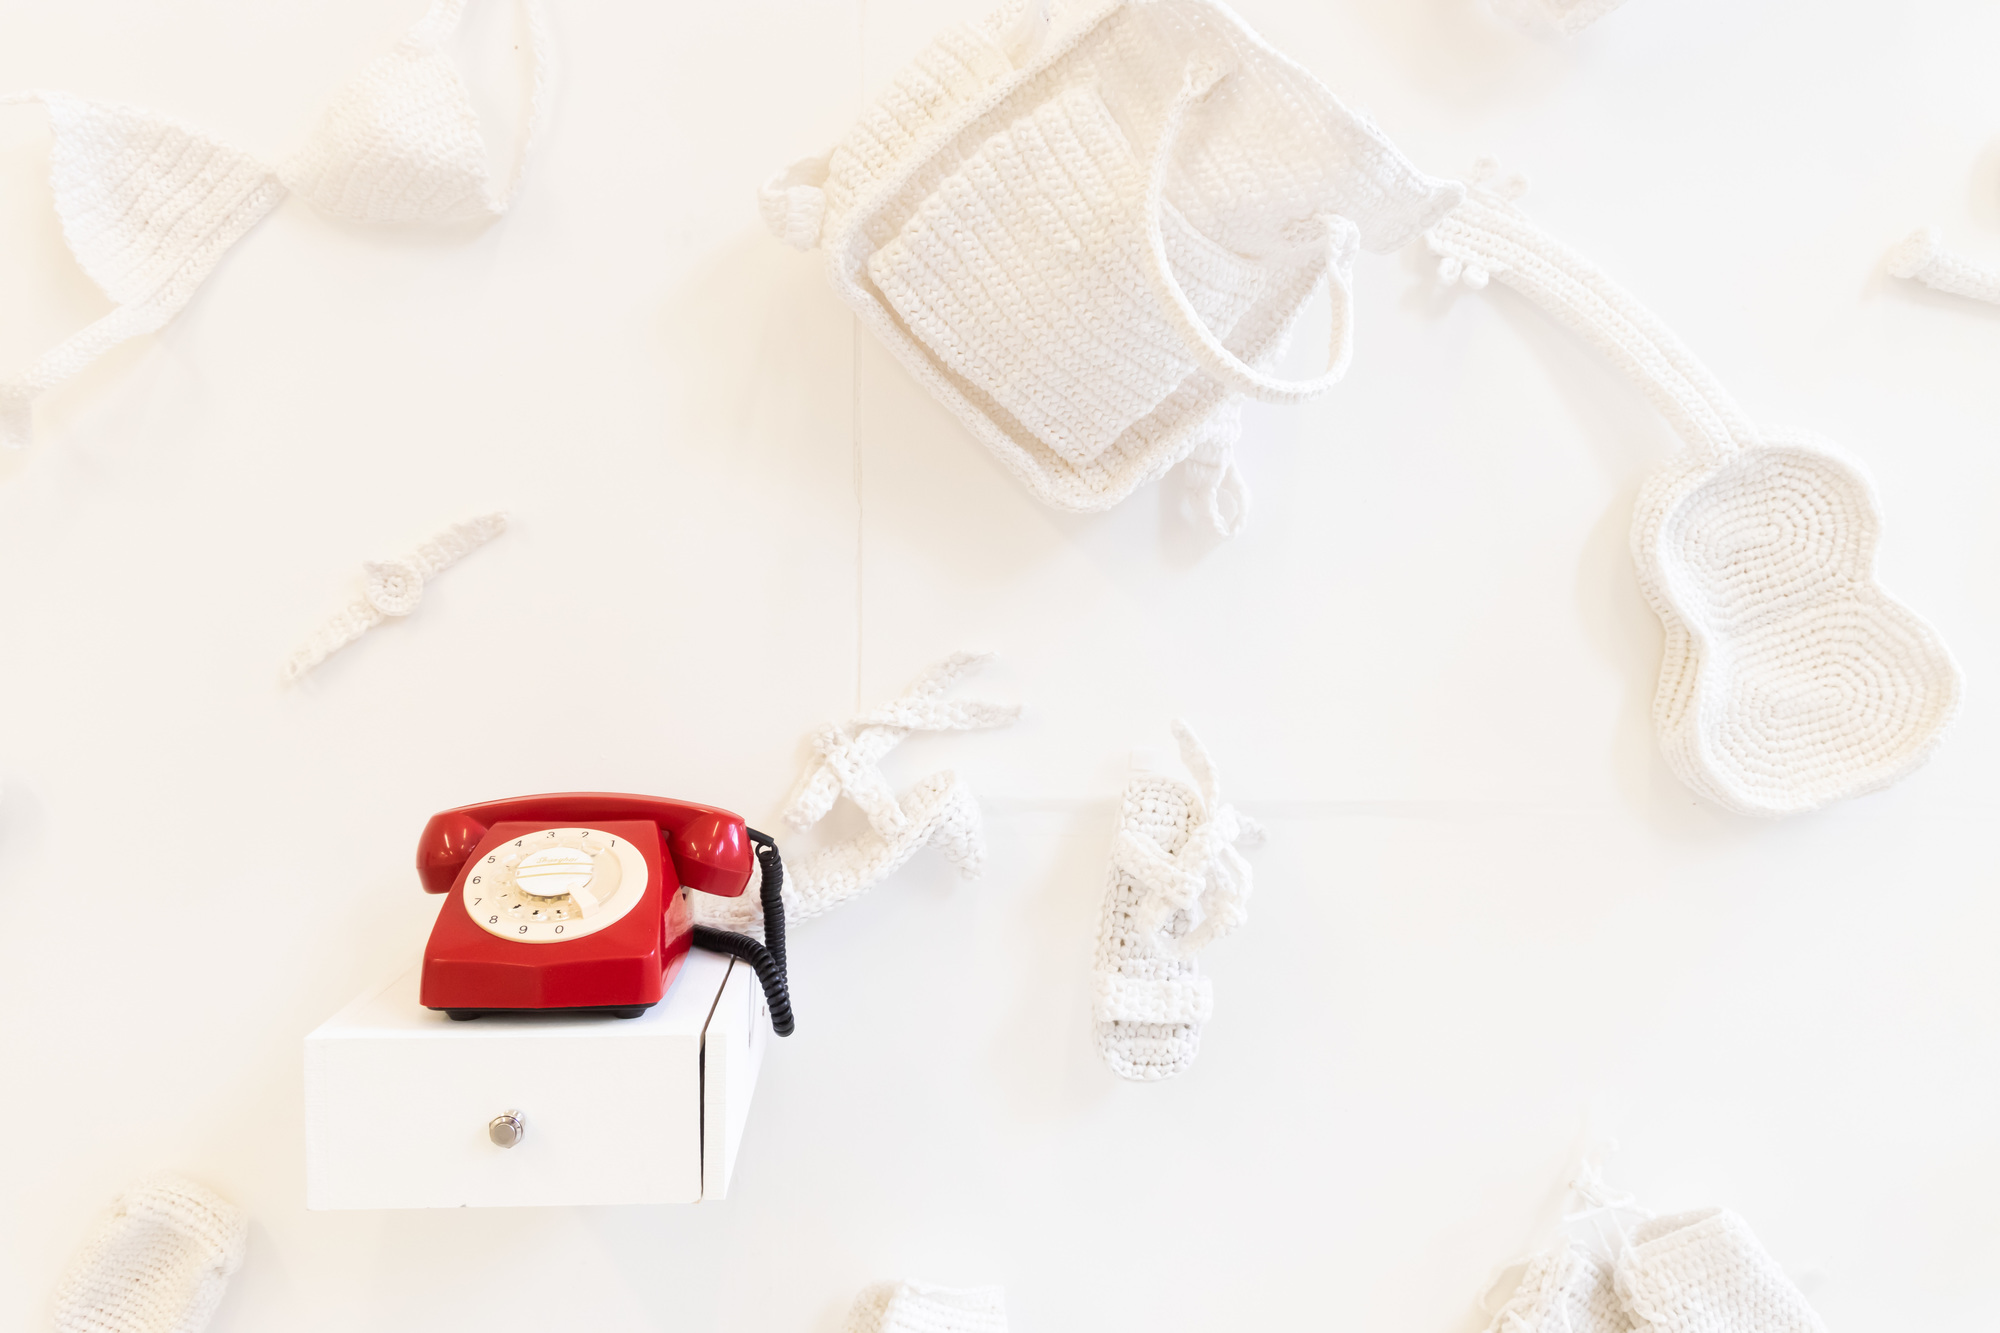 Knitted accessories and telephone installation | Xinyi Zhang